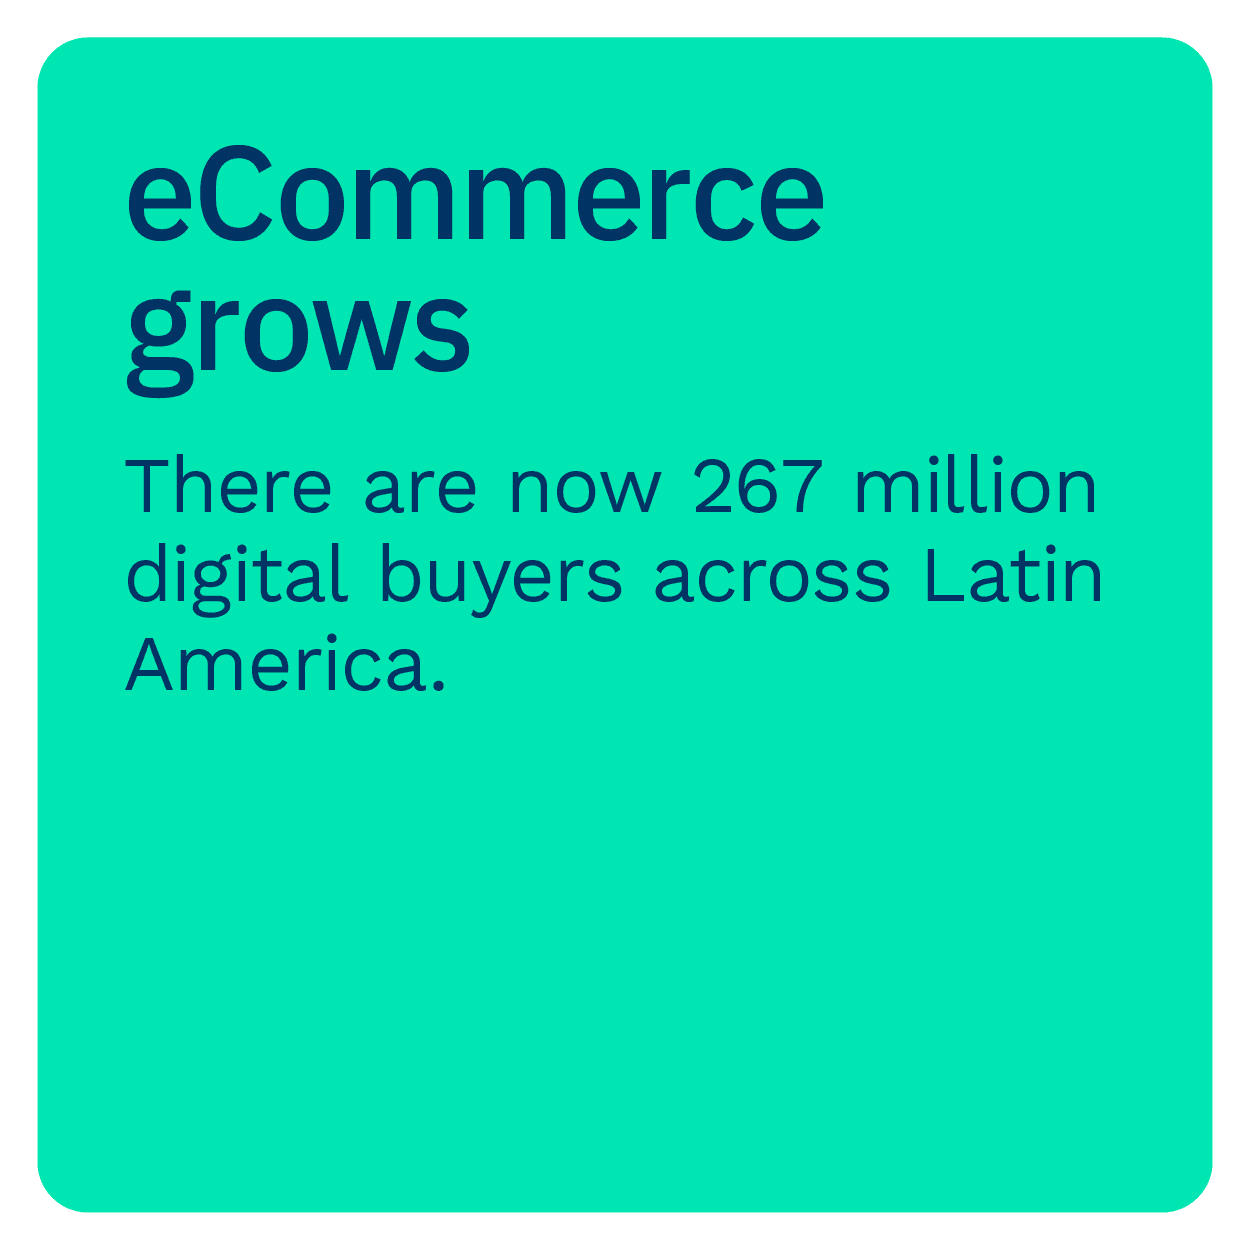 eCommerce grows: There are now 267 million digital buyers across Latin America.